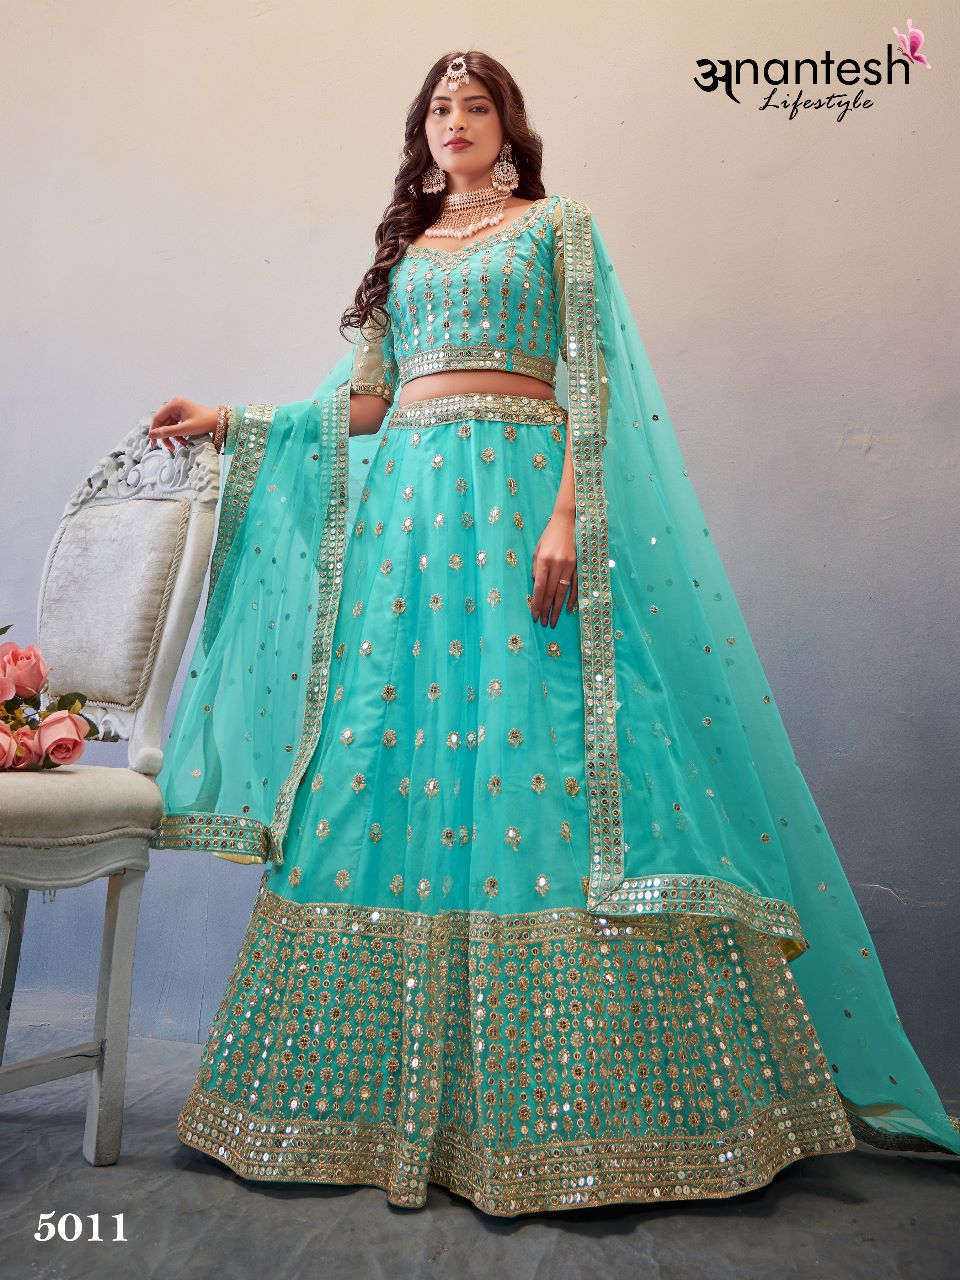 Anantesh Lifestyle Occations Vol-3 5011 Designer Lehenga Anant Tex Exports Private Limited